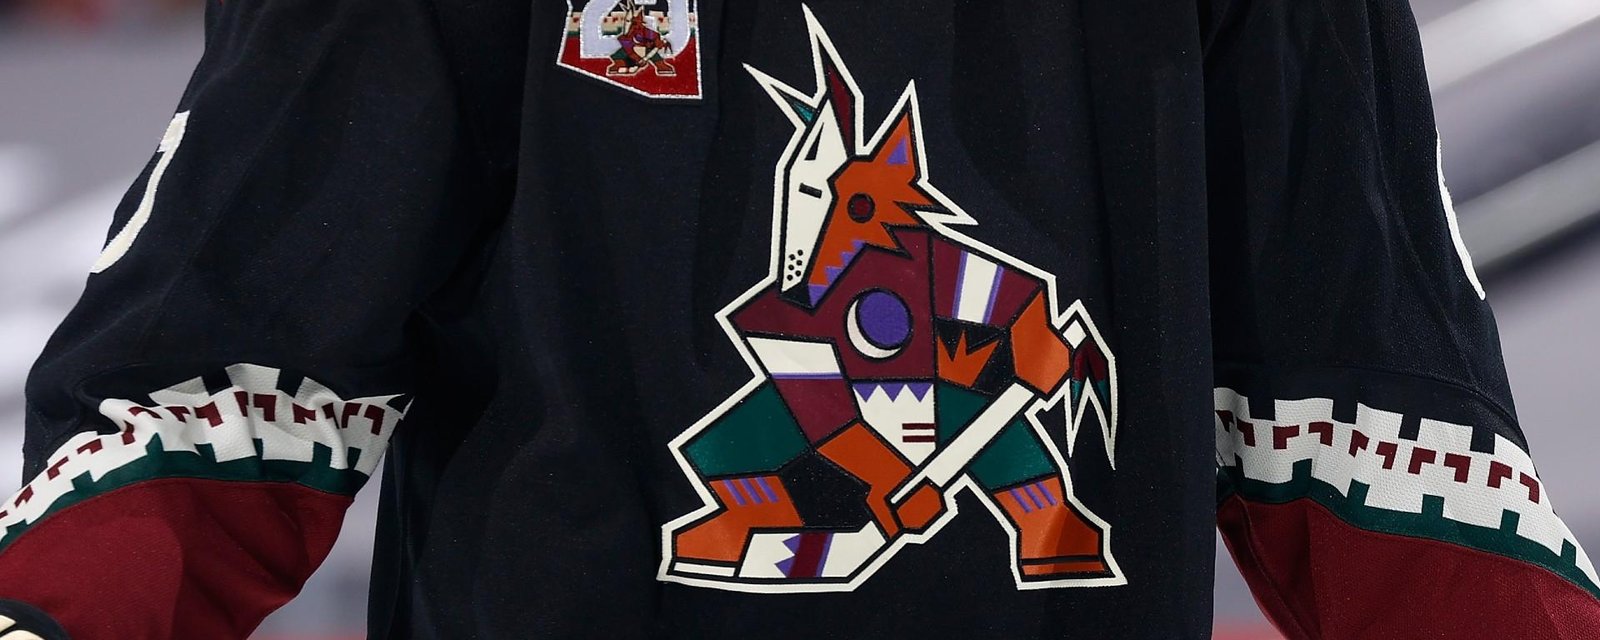 Coyotes are destroyed and exposed by NHLPA!